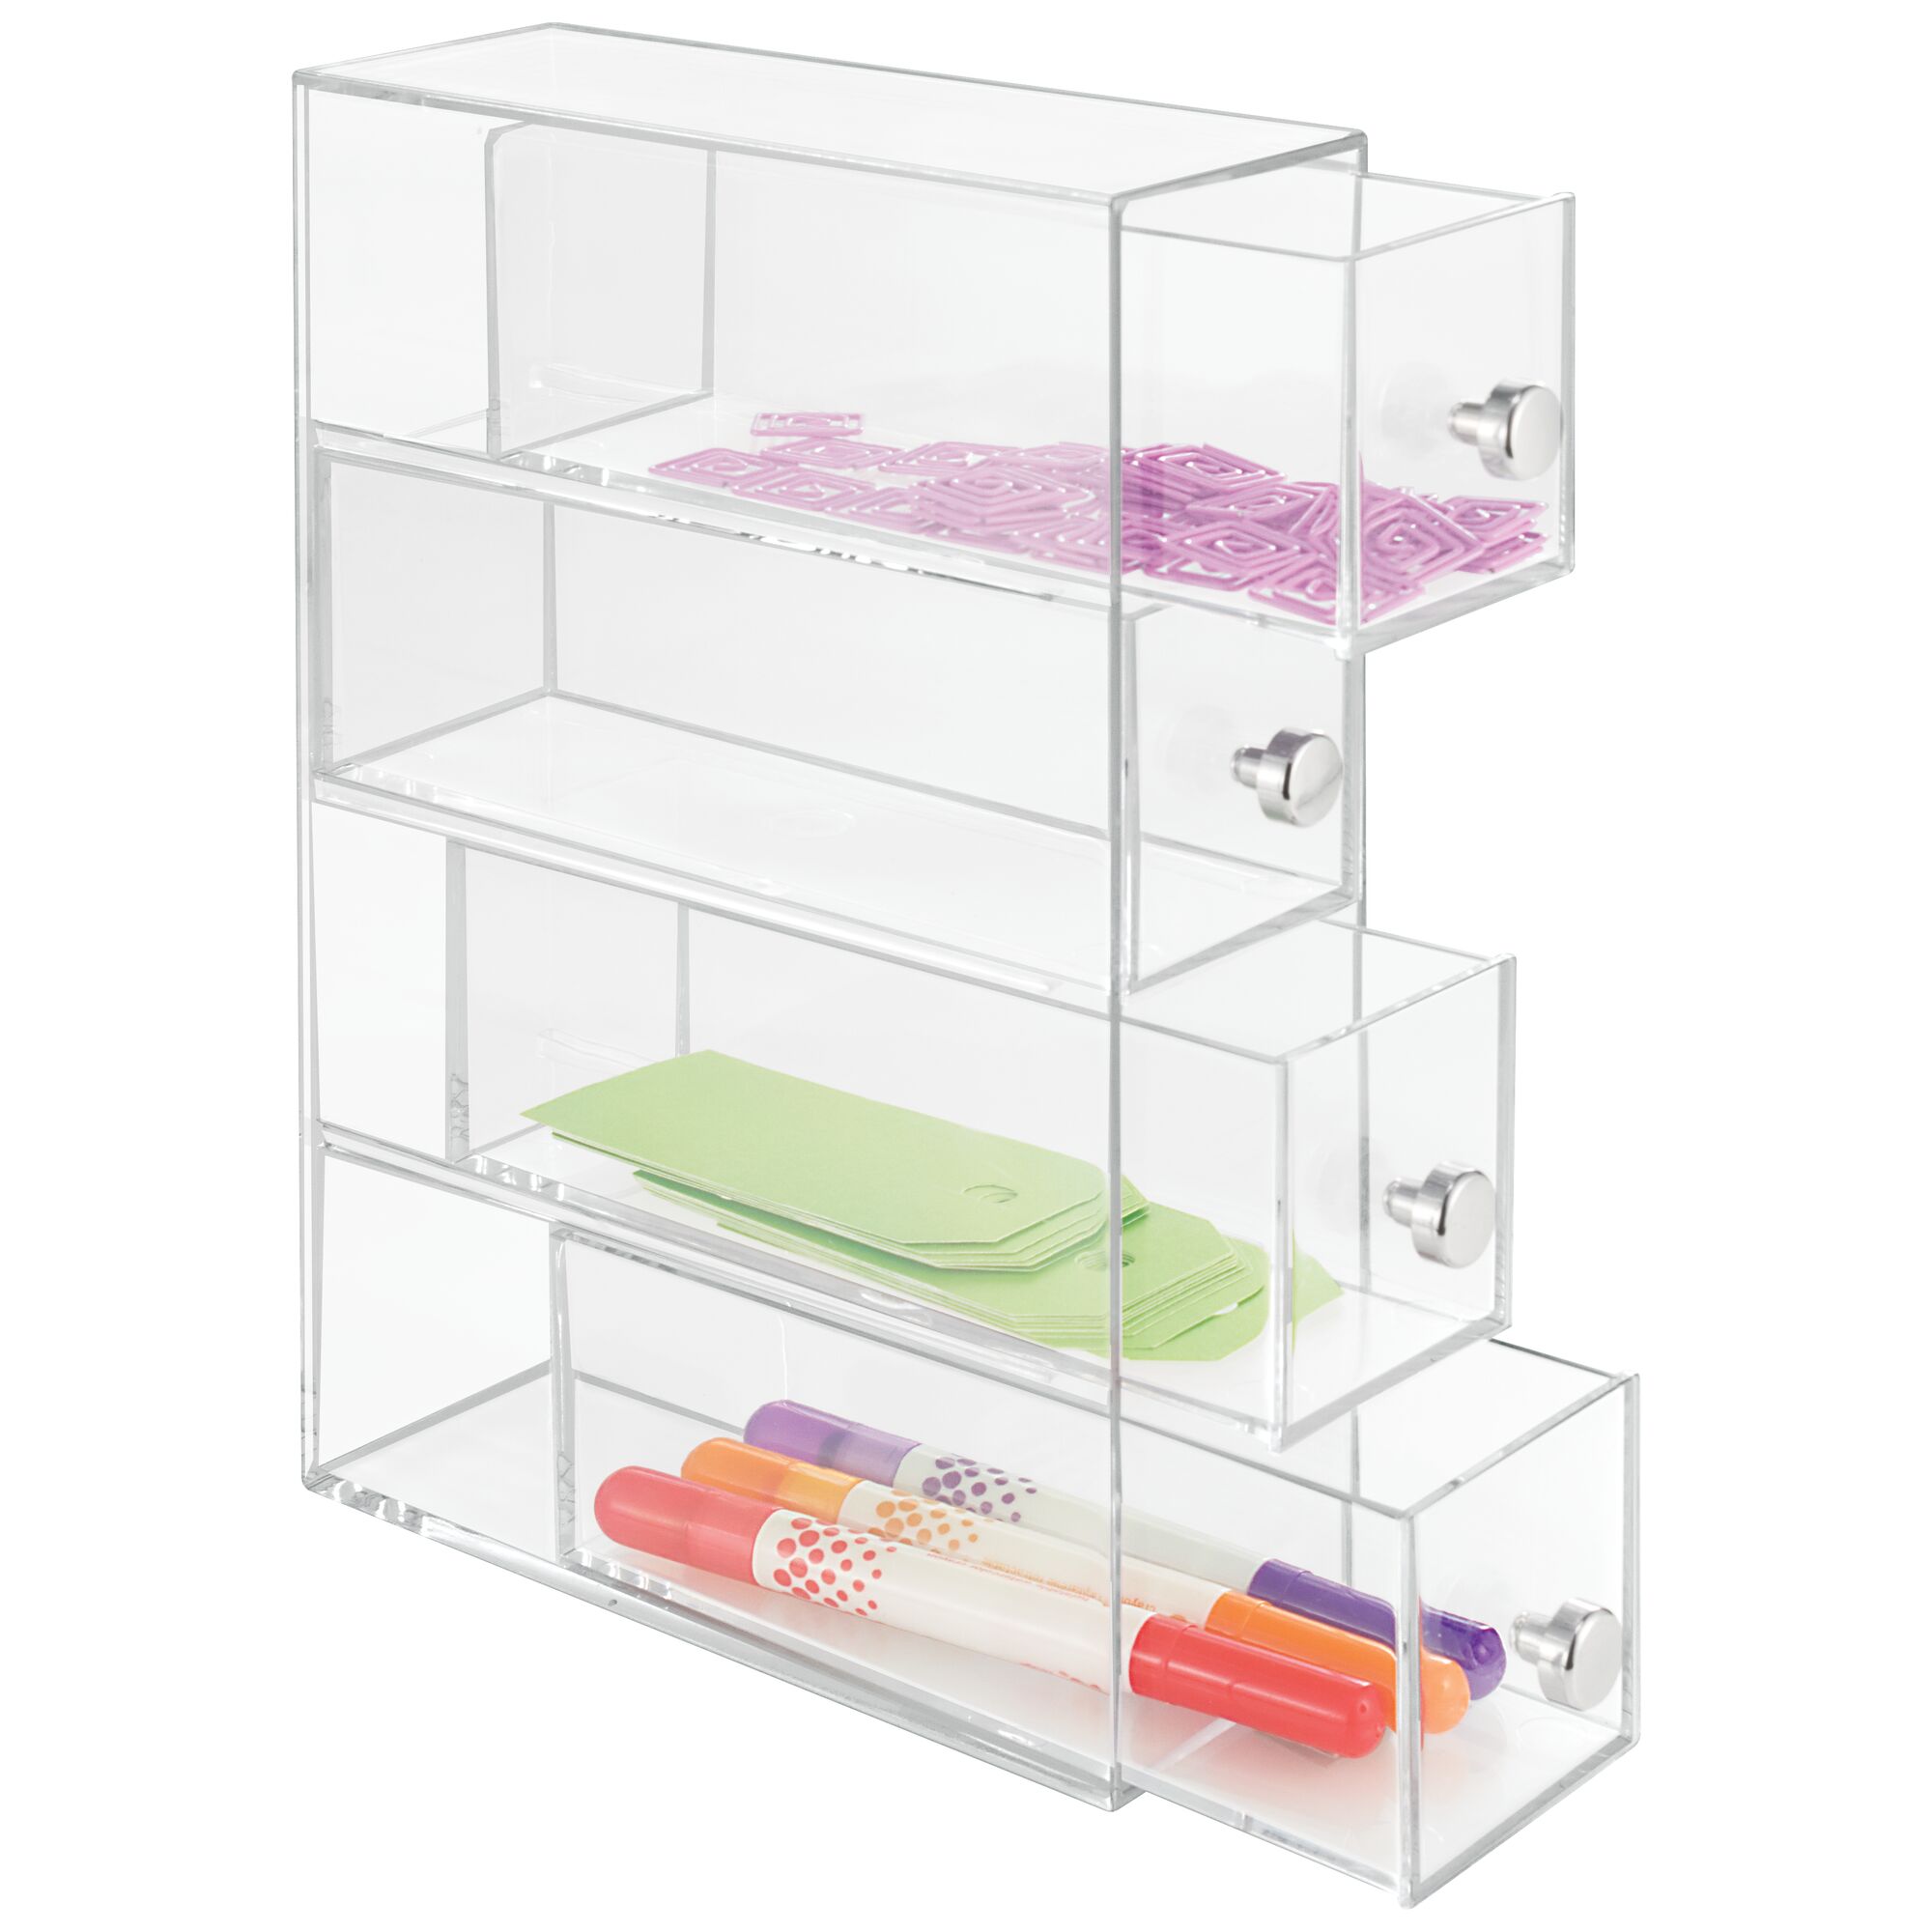 iDesign Clear Storage and Organization 4-Drawer Towers - image 1 of 8